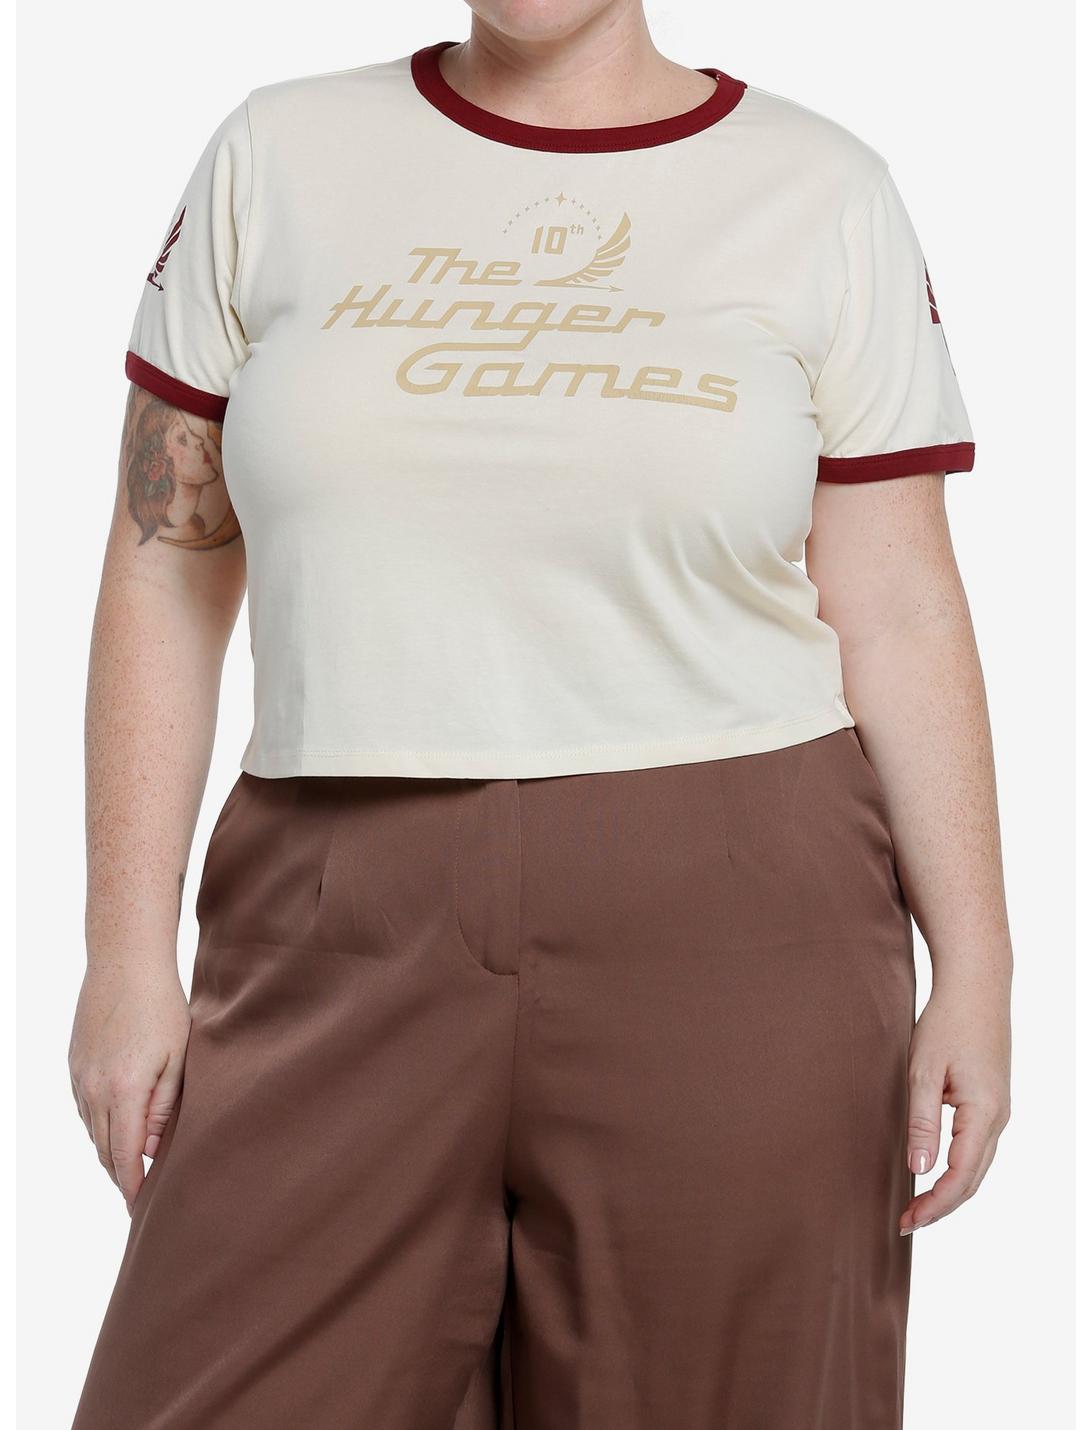 The Hunger Games: The Ballad Of Songbirds & Snakes Ringer T-Shirt Plus Size, CREAM, hi-res